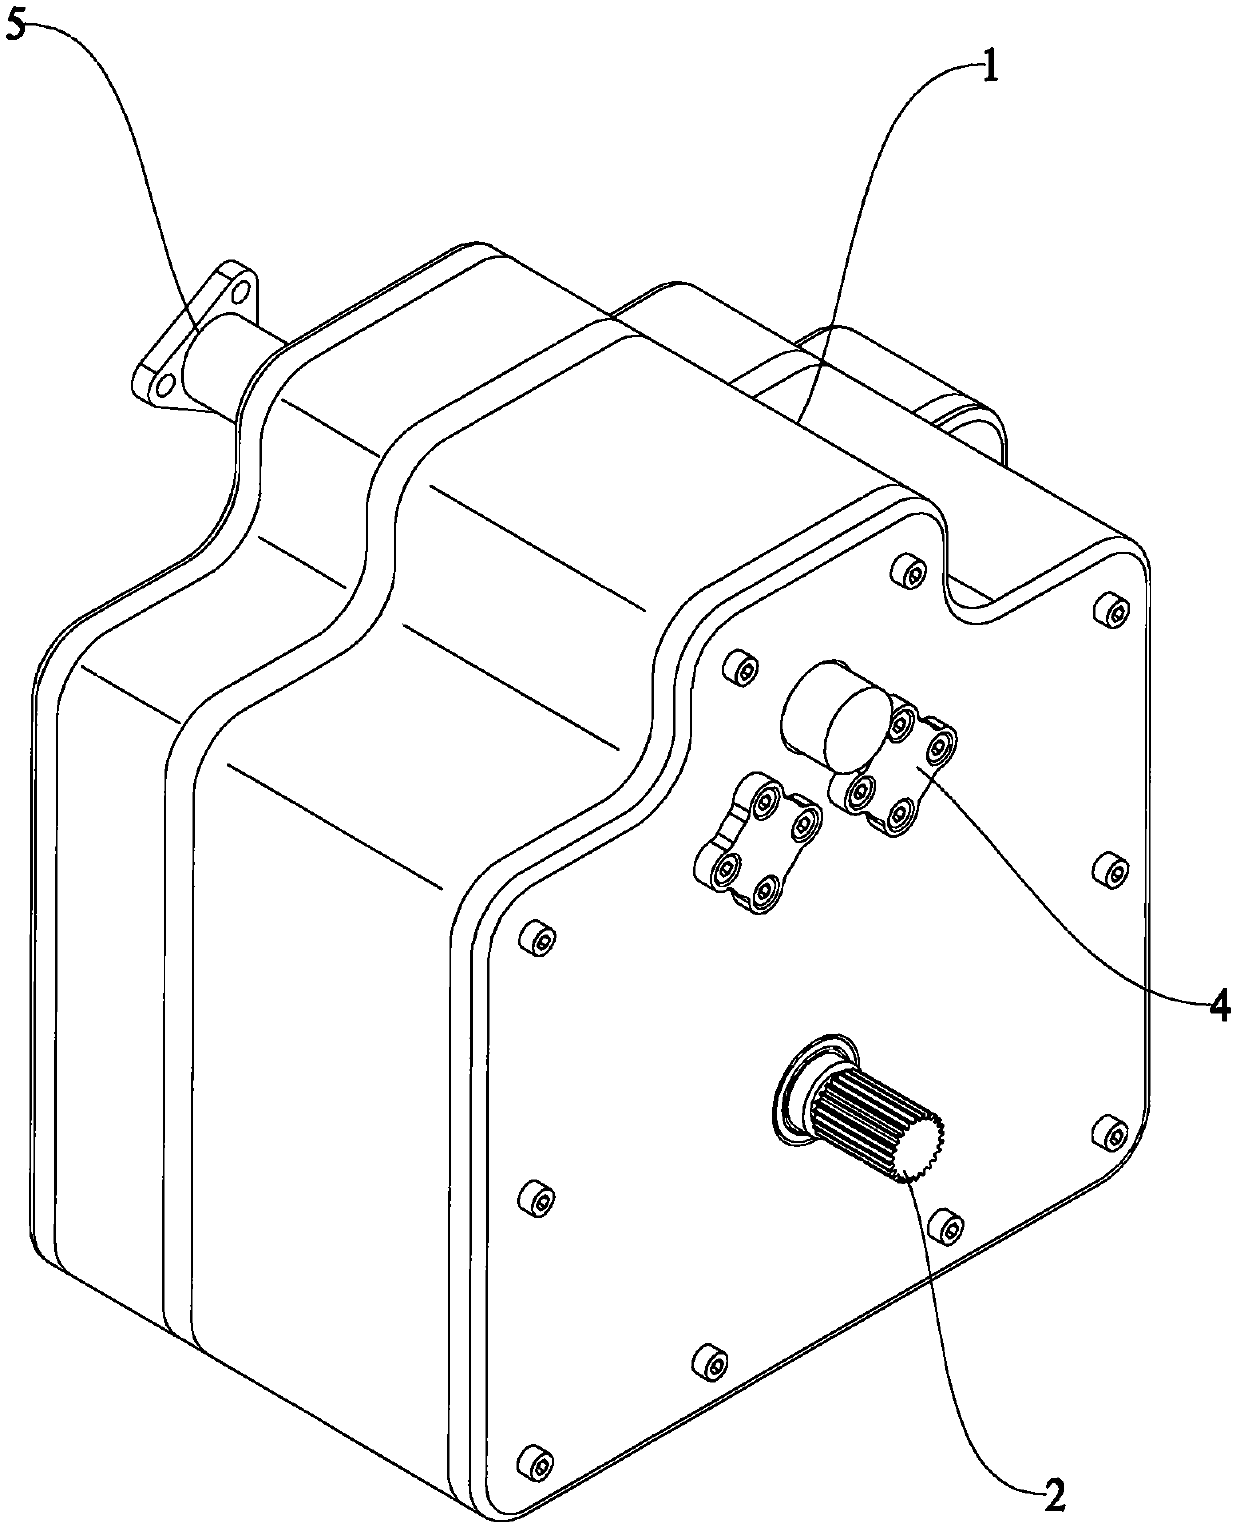 A transmission mechanism for a tractor